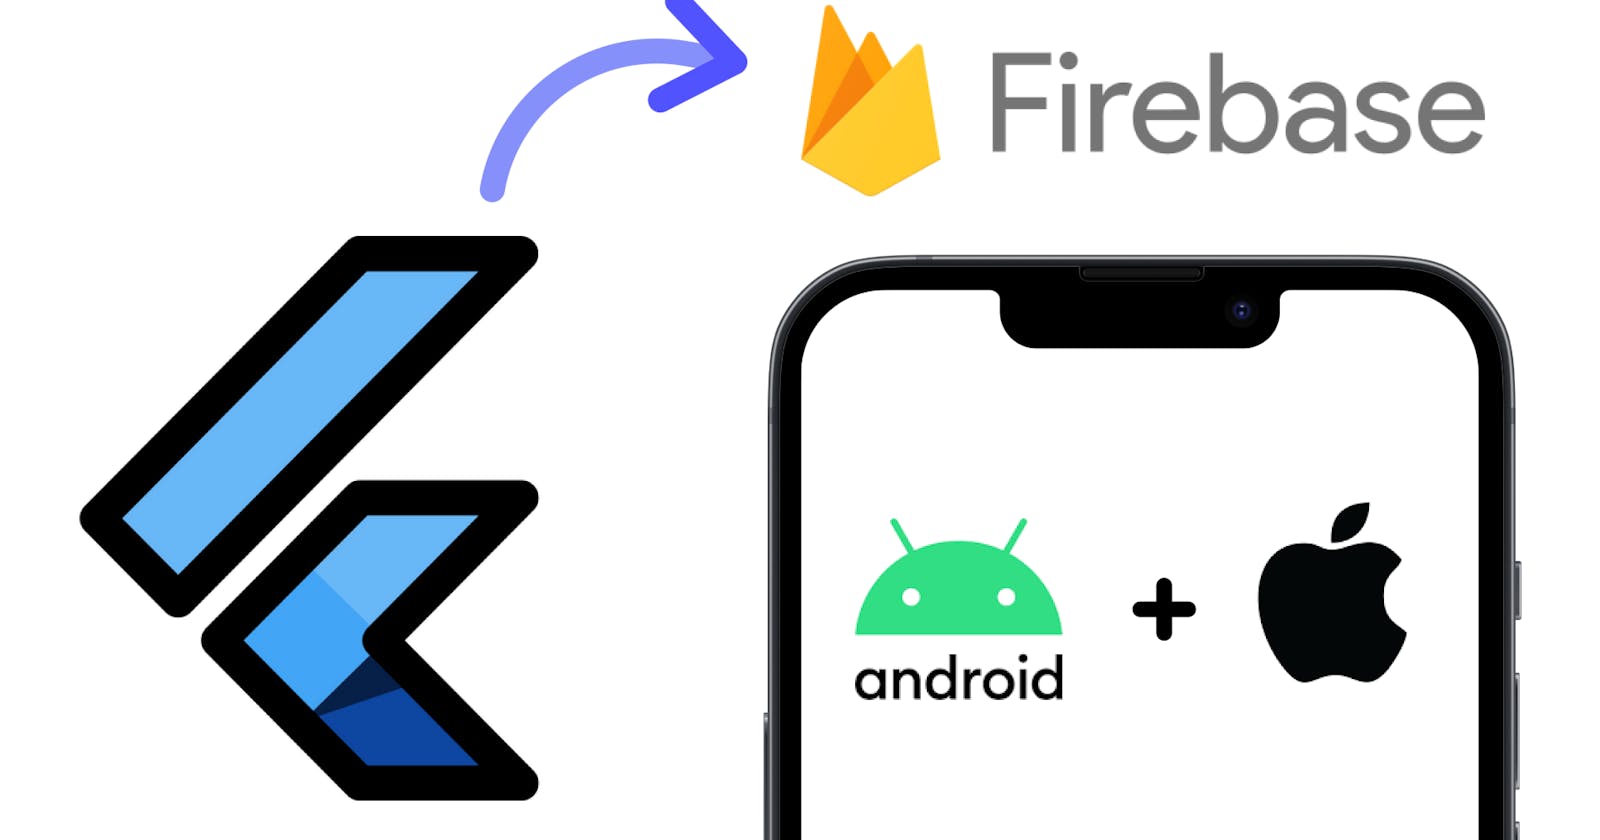 How to Add Firebase to Flutter App (ANDROID, IOS) 2023